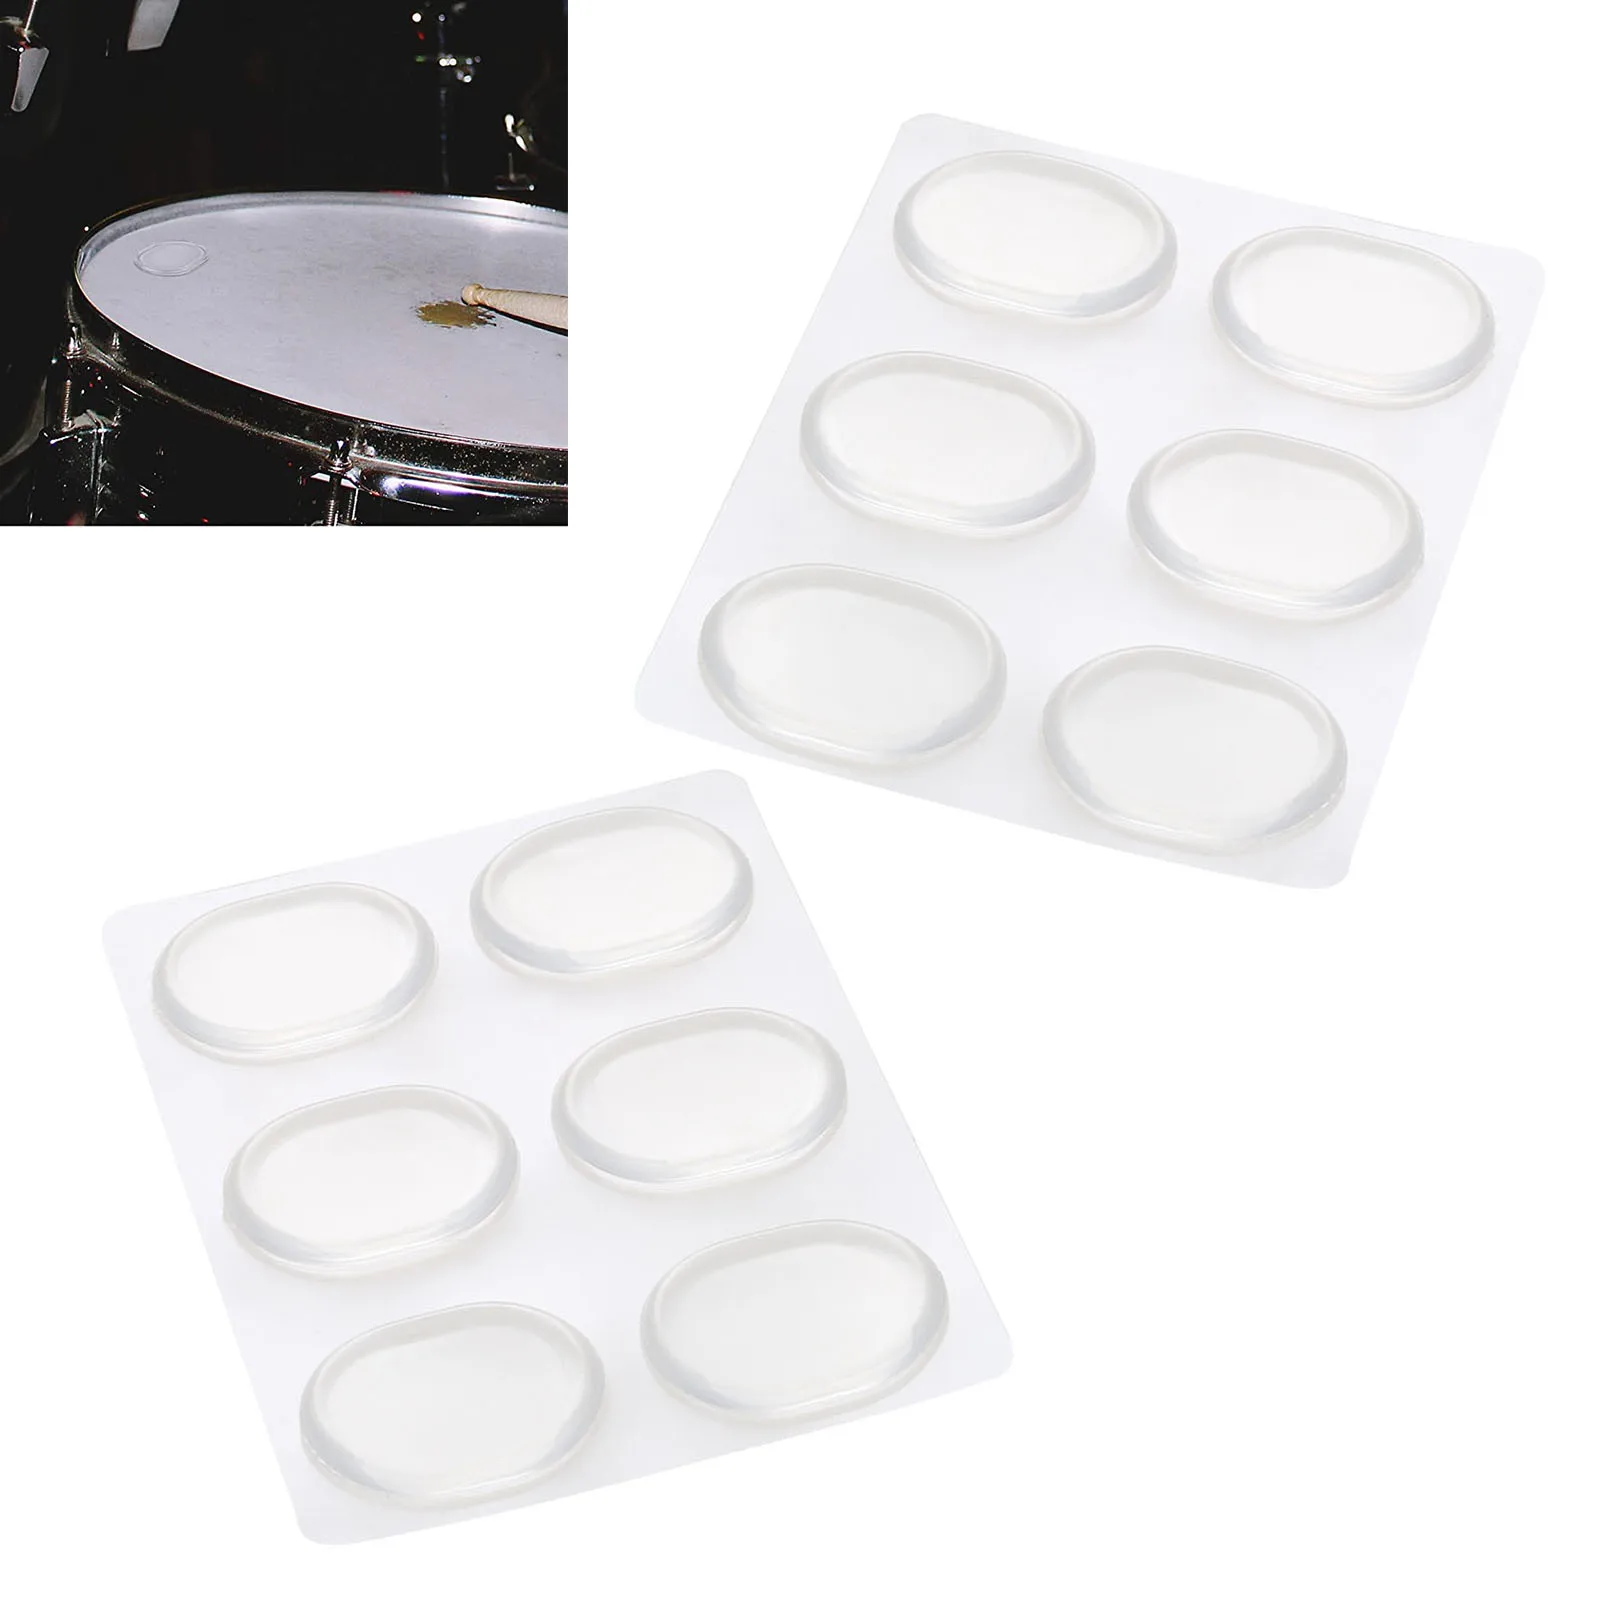 24 Pieces Oval Drum Dampeners 2 Pieces Long Clear Drum Dampeners Silicone Drum Silencers Soft Drum Dampening Gel Pads Transparent Drum Mute Pads for Drums Tone Control CCOZN Drum Dampeners Gel Pads 